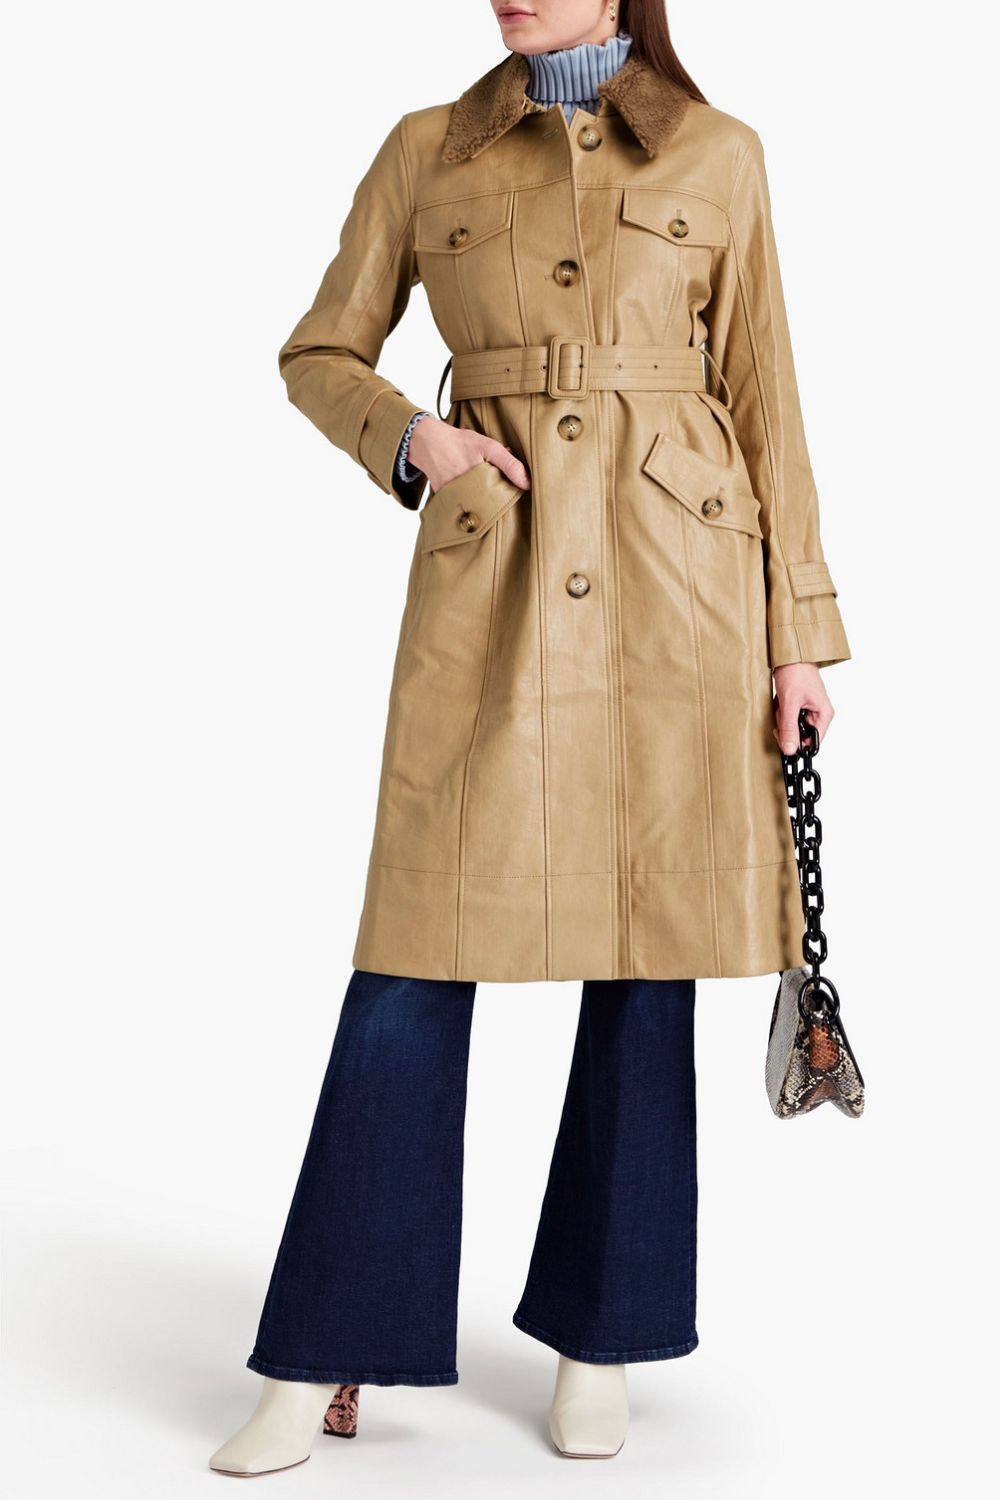 The-Gloss-Magazine-best-trench-coats-to-buy-now-Ireland-8